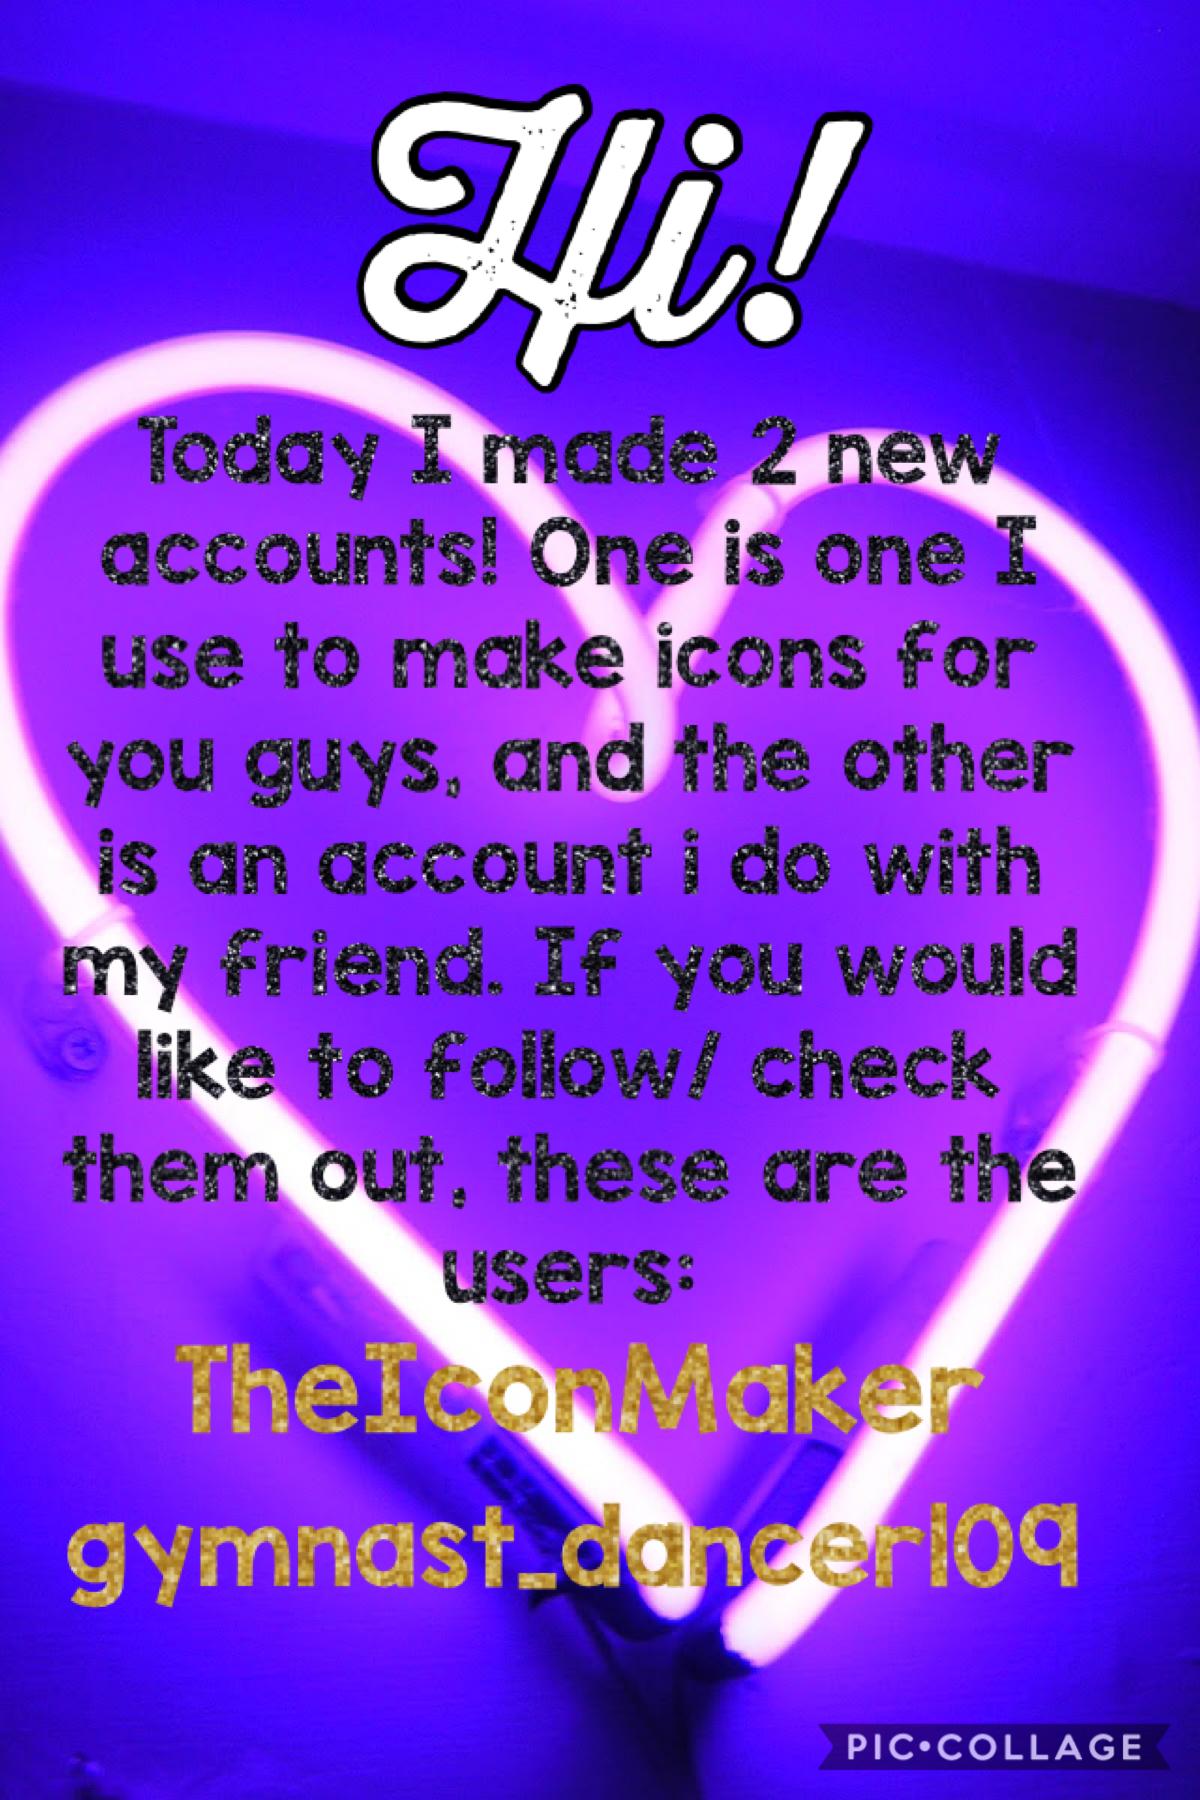 I will be posting on these accounts soon- once I put my first collage on TheIconMaker acc, comment if you want and icon, and what you want on it.